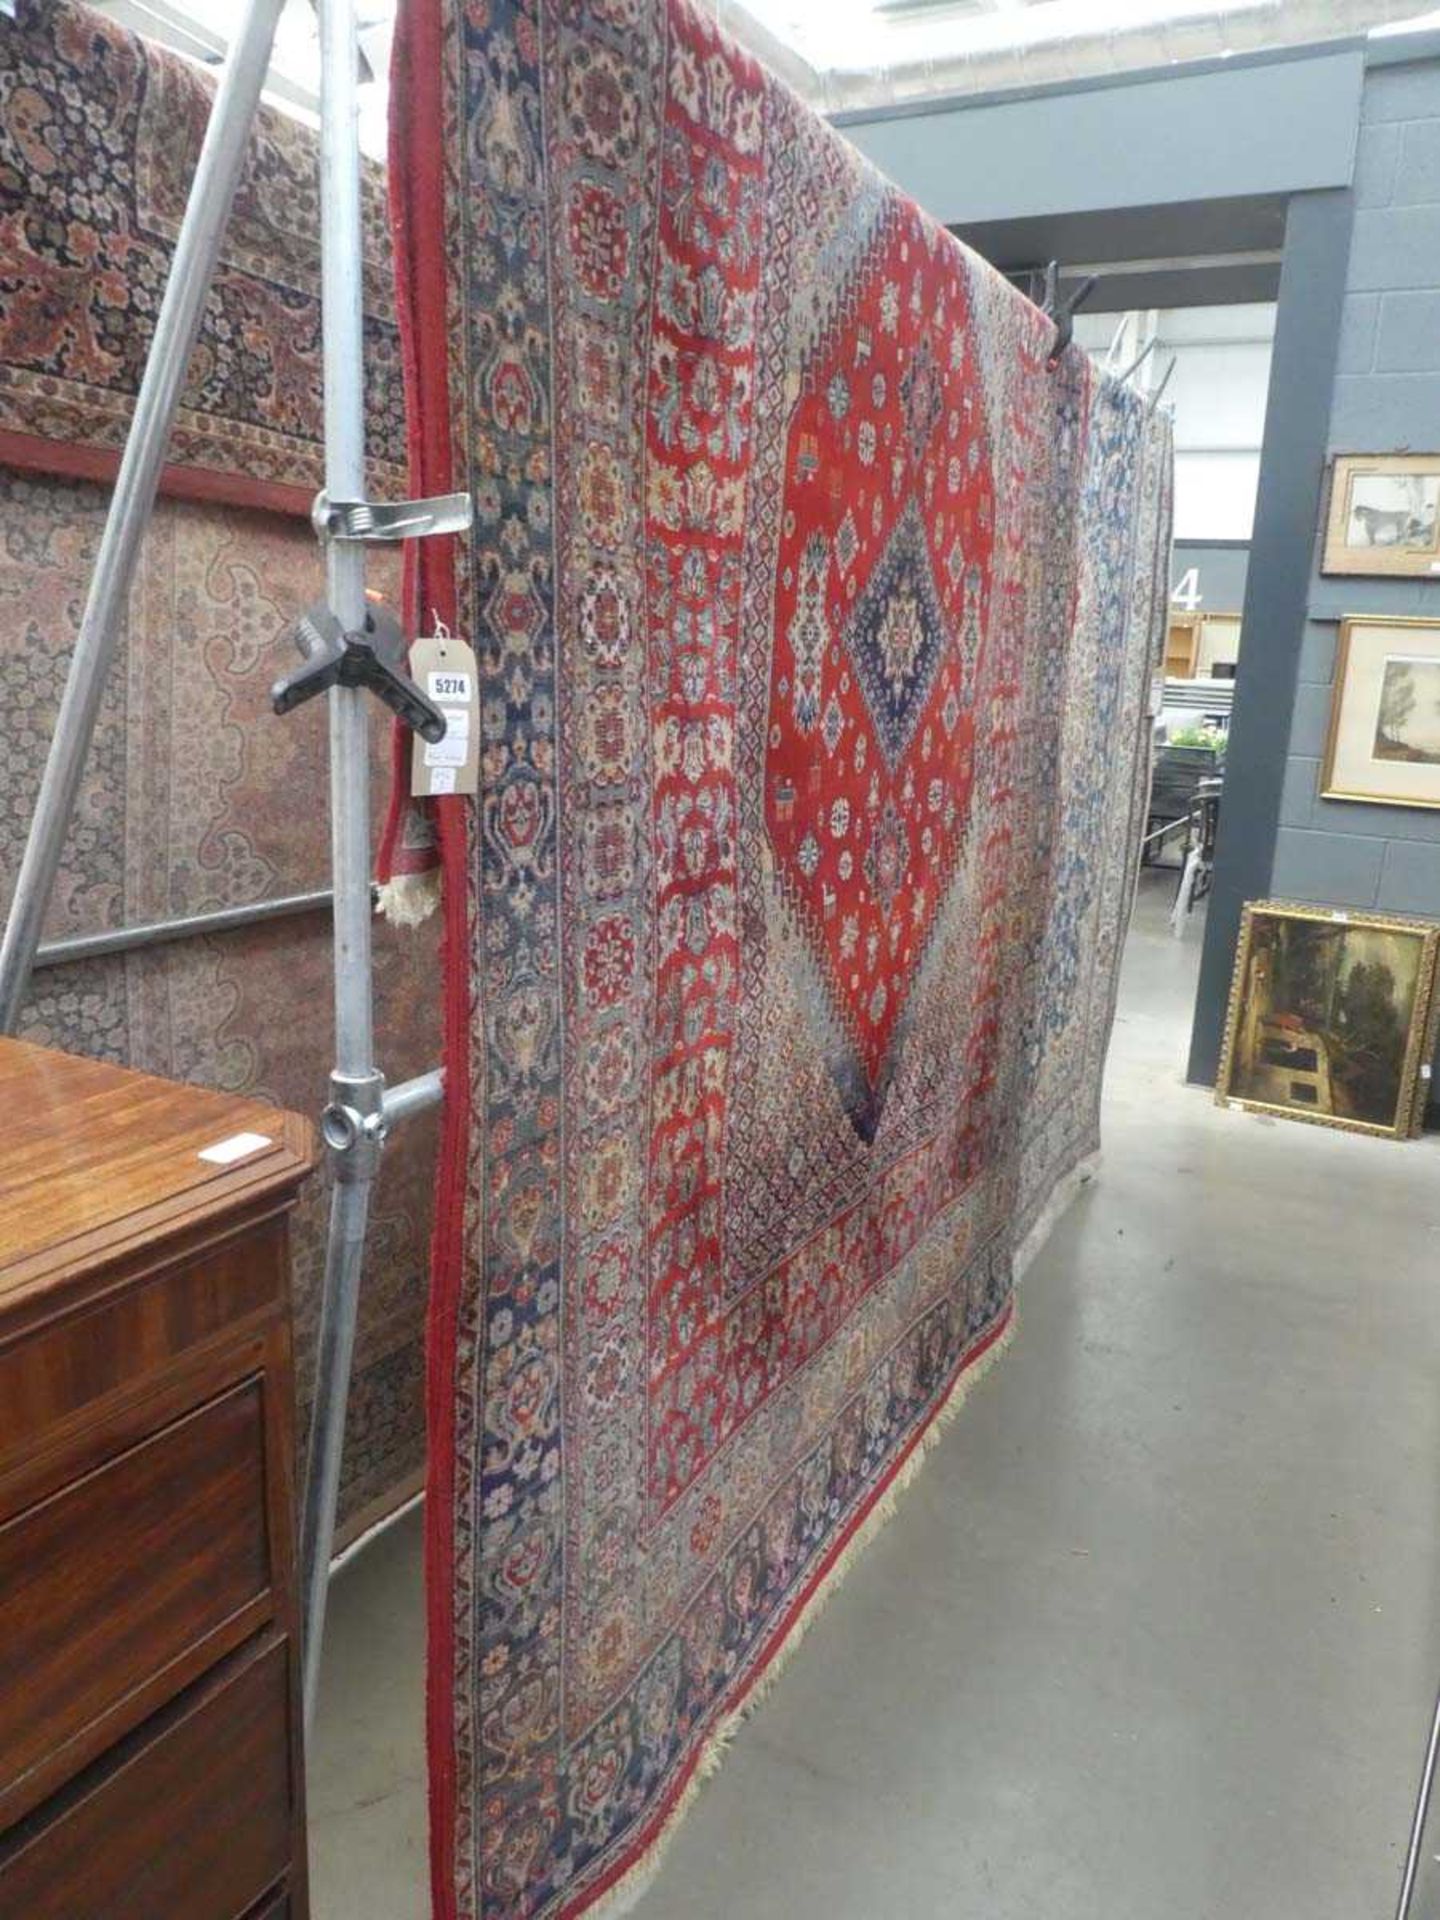 (3) Large red floral carpet with central medallion